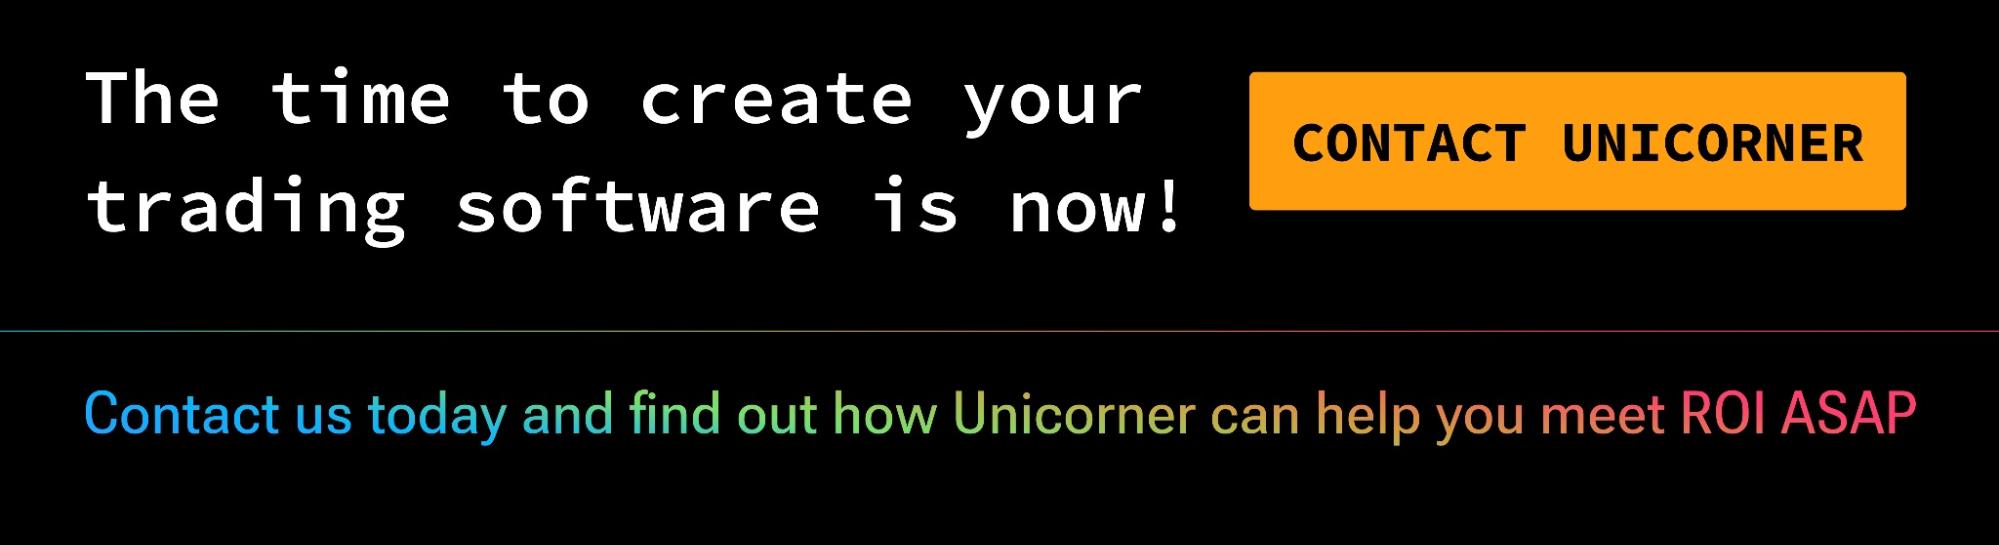 The time to create your trading software is now! Contact us today and find out how Unicorner can help you meet ROI ASAP.